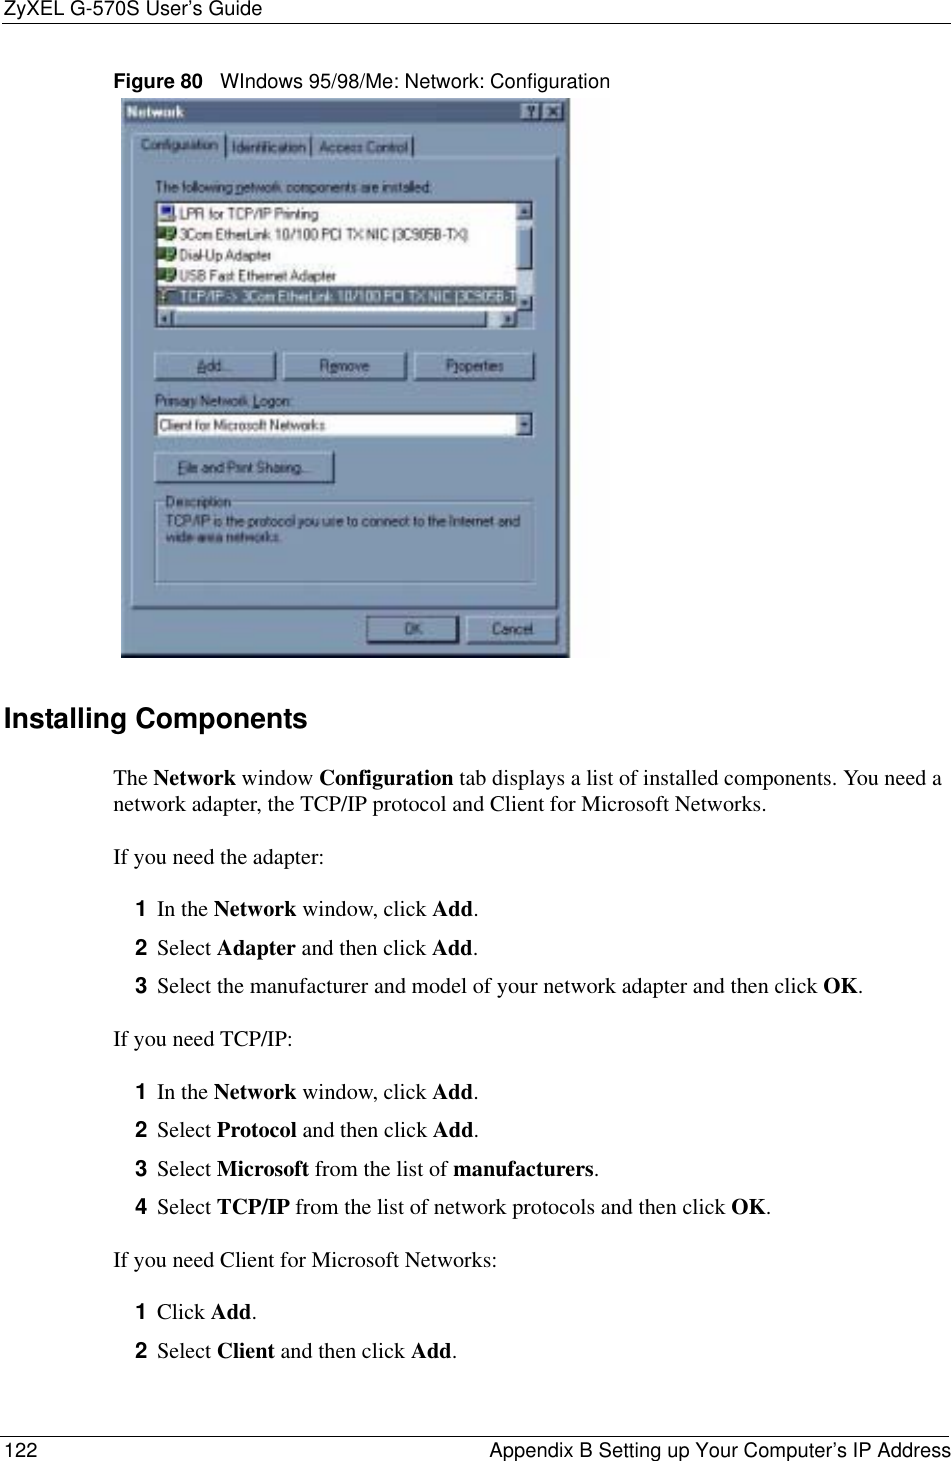 ZyXEL G-570S User’s Guide122 Appendix B Setting up Your Computer’s IP AddressFigure 80   WIndows 95/98/Me: Network: ConfigurationInstalling ComponentsThe Network window Configuration tab displays a list of installed components. You need a network adapter, the TCP/IP protocol and Client for Microsoft Networks.If you need the adapter:1In the Network window, click Add.2Select Adapter and then click Add.3Select the manufacturer and model of your network adapter and then click OK.If you need TCP/IP:1In the Network window, click Add.2Select Protocol and then click Add.3Select Microsoft from the list of manufacturers.4Select TCP/IP from the list of network protocols and then click OK.If you need Client for Microsoft Networks:1Click Add.2Select Client and then click Add.